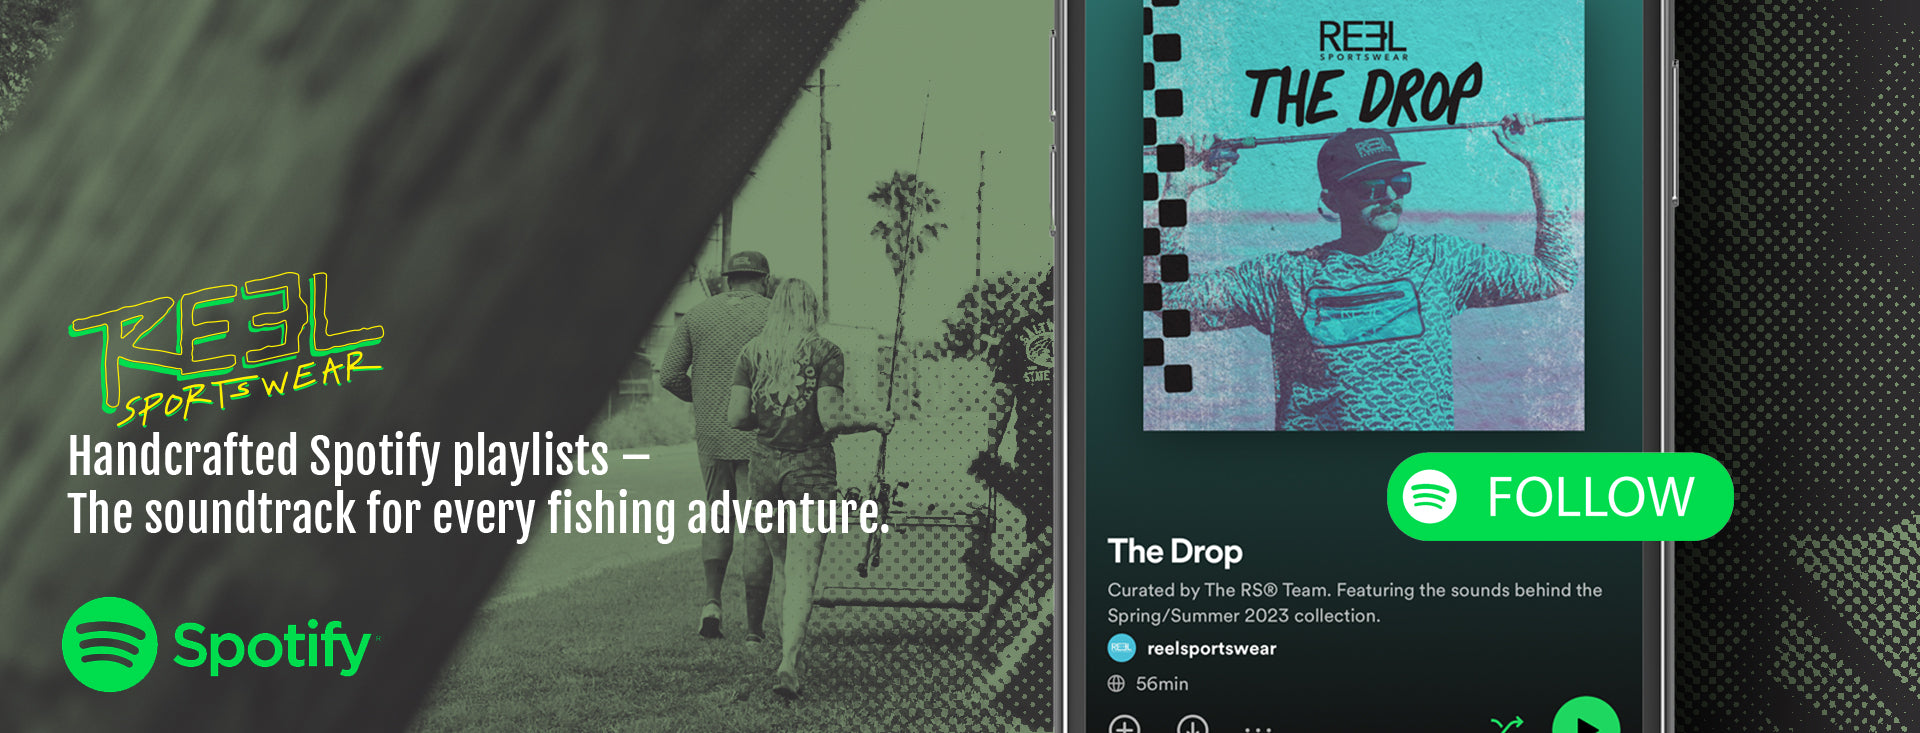 Set the Vibe for Your Adventure with Reel Sportswear's Ultimate Spotify Playlists